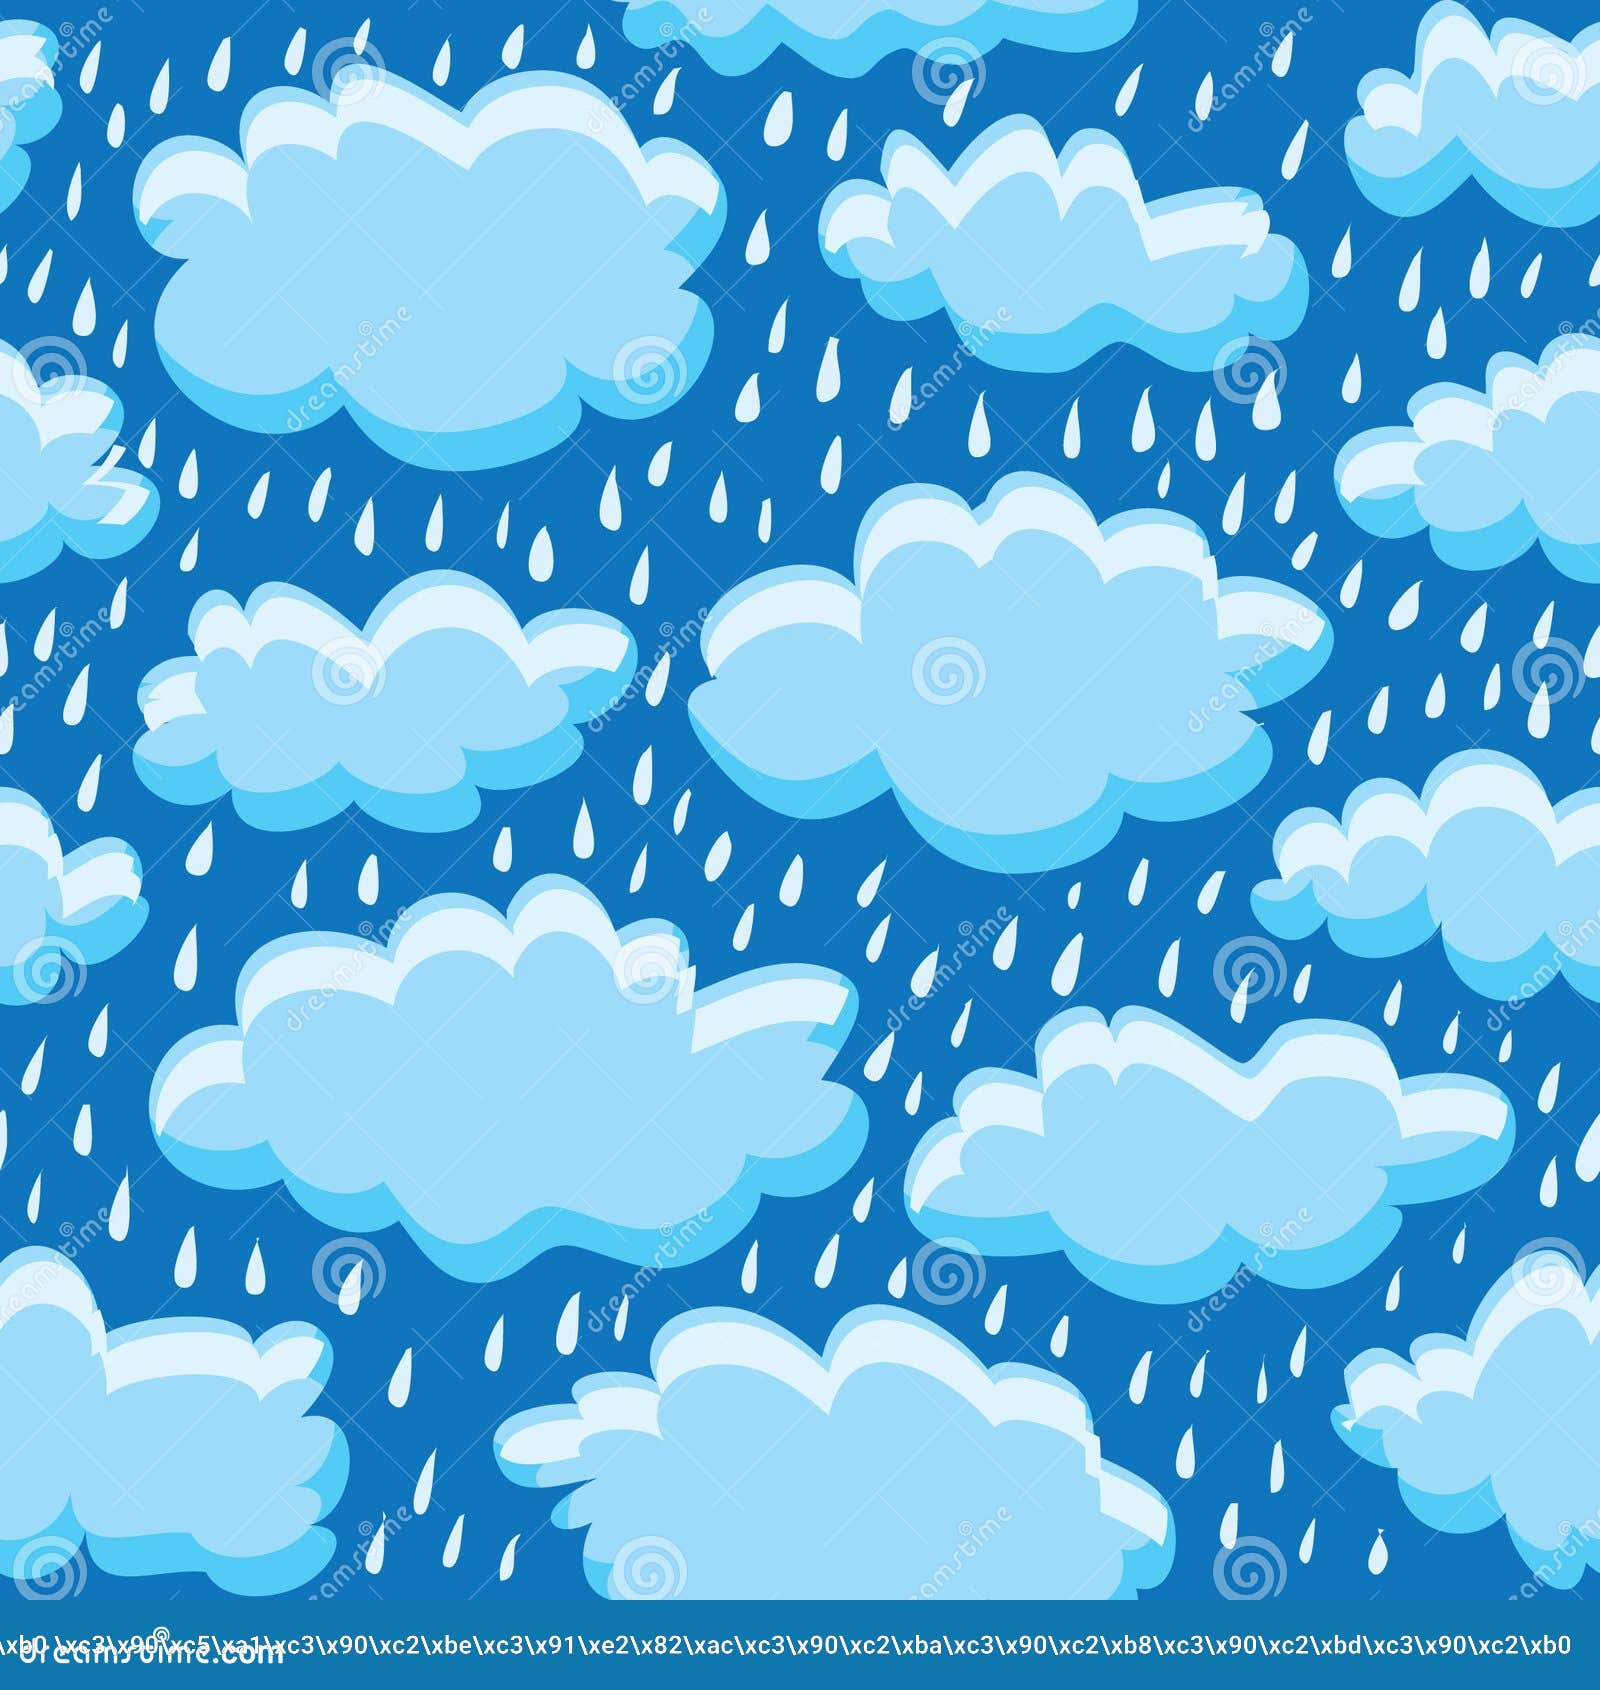 Rain clouds and rain stock vector. Illustration of cyclone - 35230259